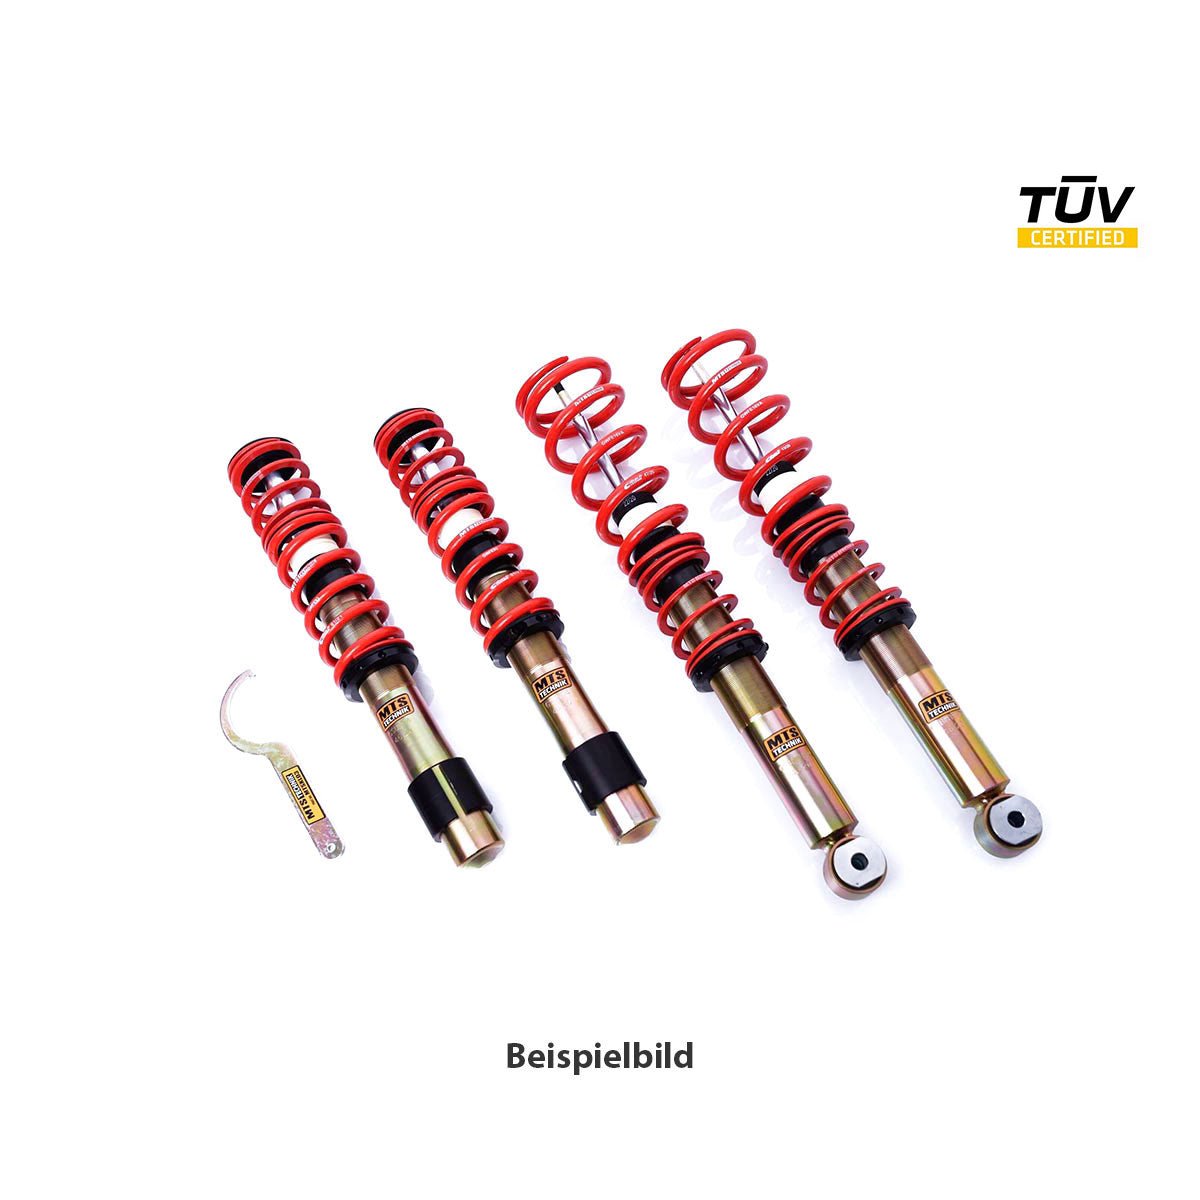 MTS TECHNIK coilover kit SPORT BMW Z4 Coupe E86 (with TÜV) - PARTS33 GmbH